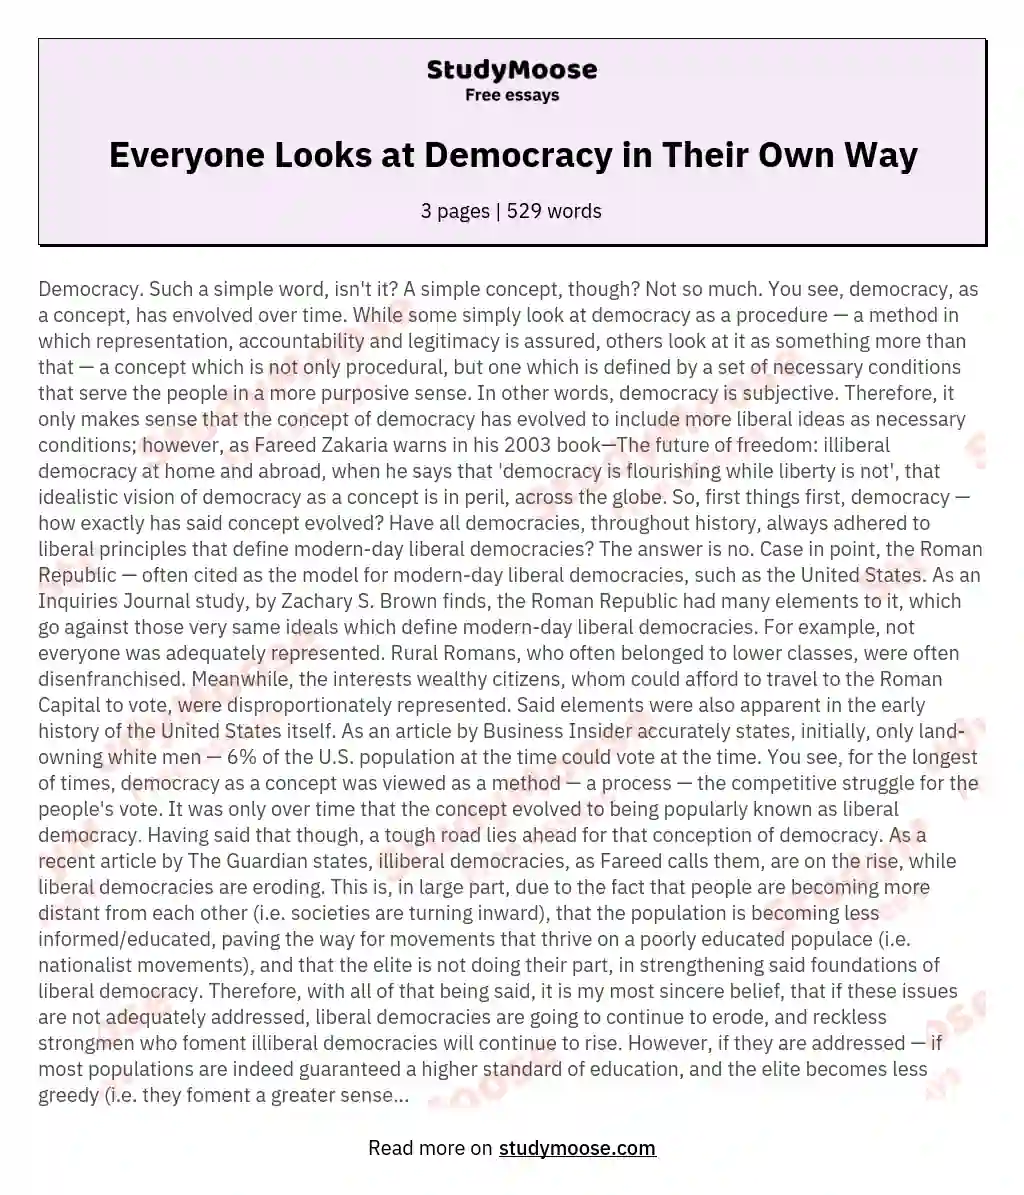 Everyone Looks at Democracy in Their Own Way essay